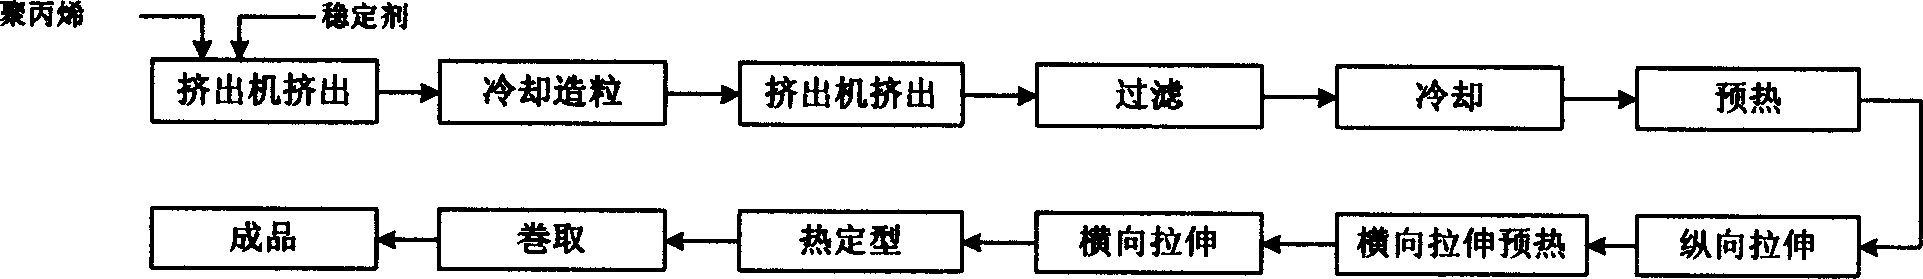 Combination of stabilizing agent in use for producing polyolefine resin